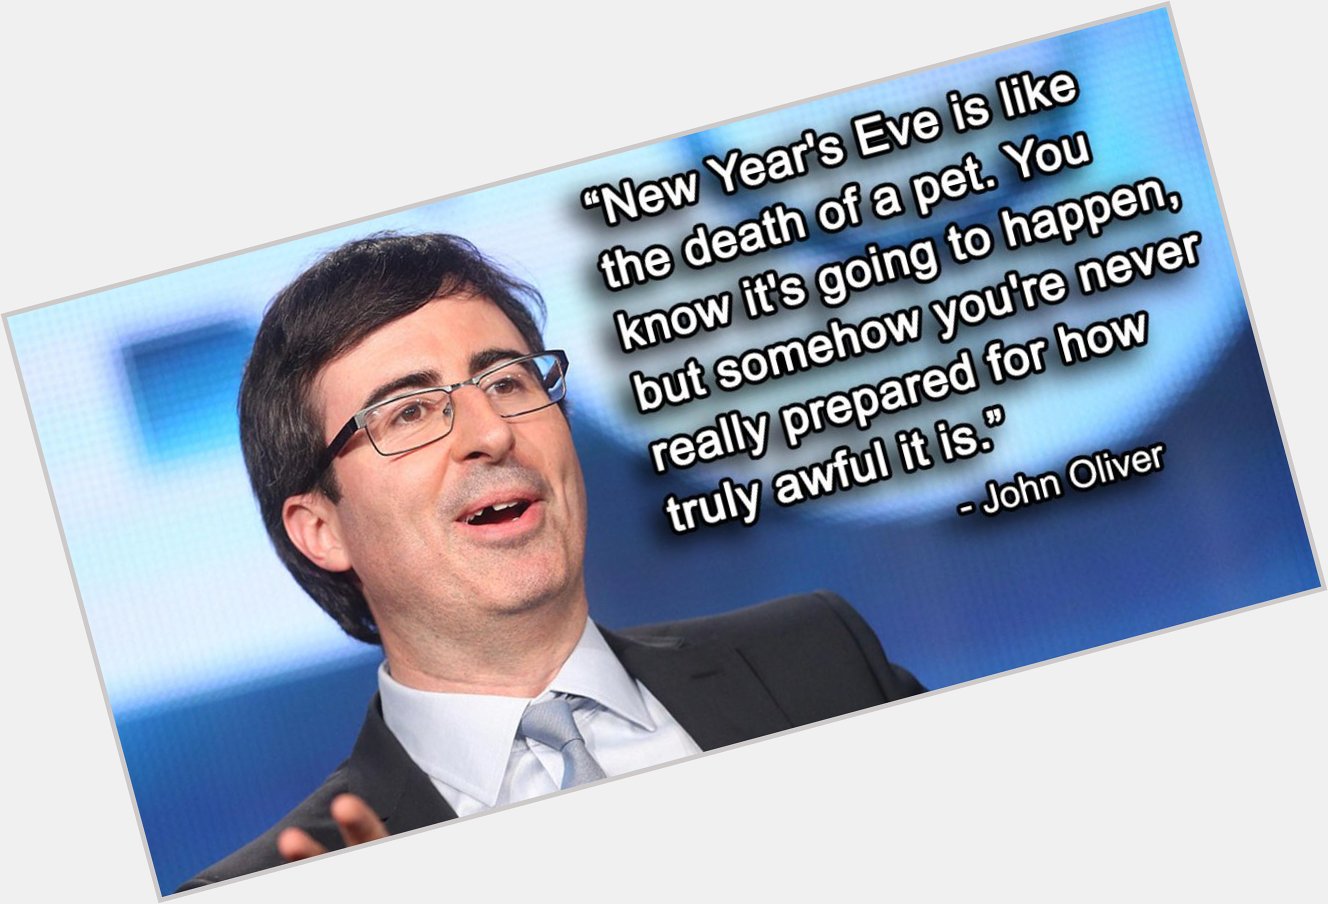 11 John Oliver quotes that make the truth easier to swallow (Happy birthday, 